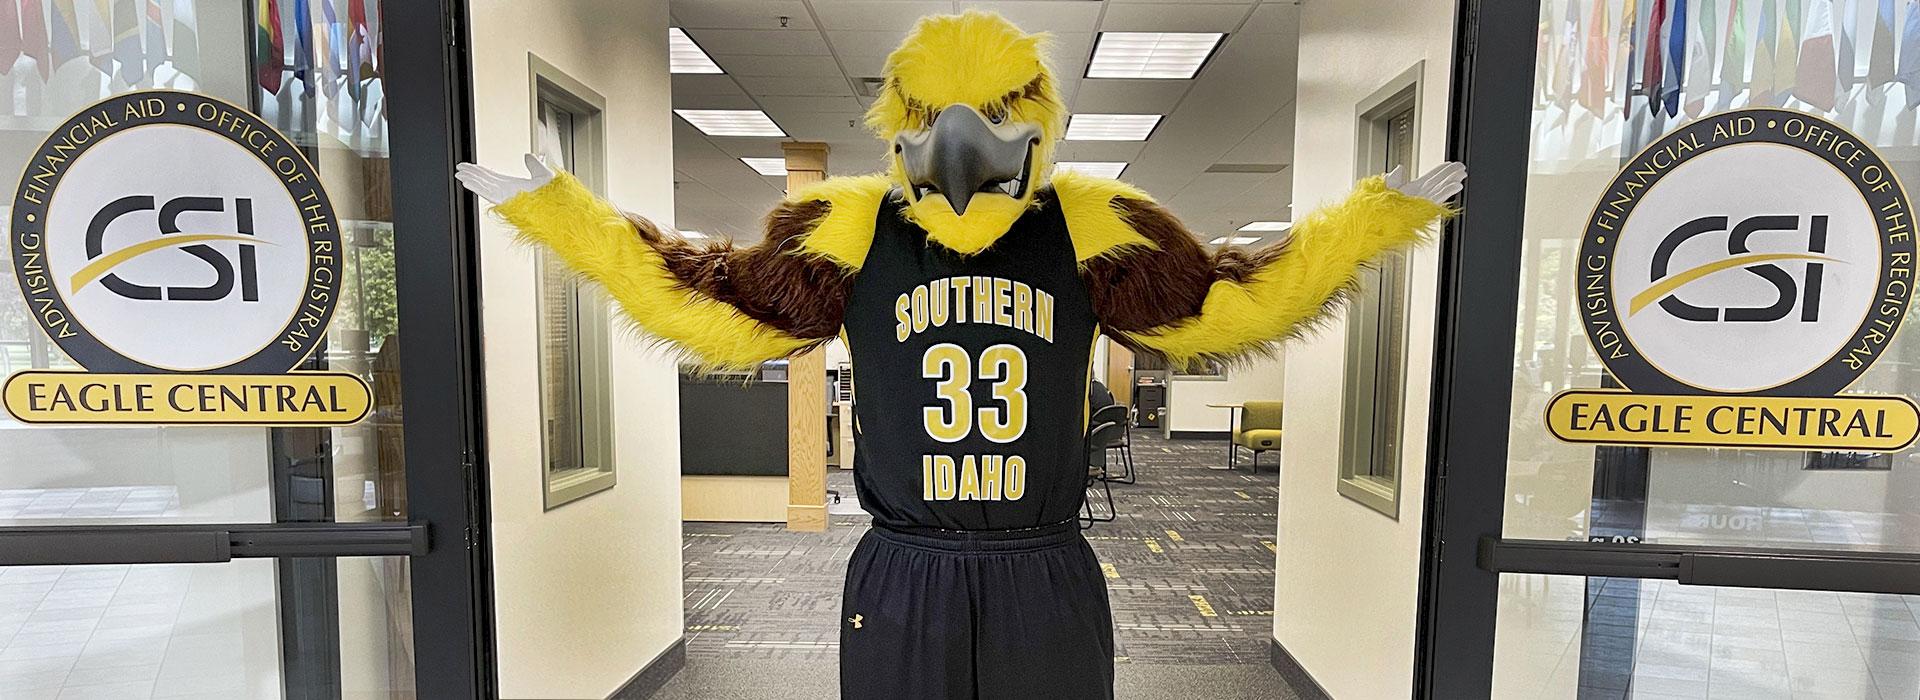 Gilbert the golden eagle standing outside of Eagle Central